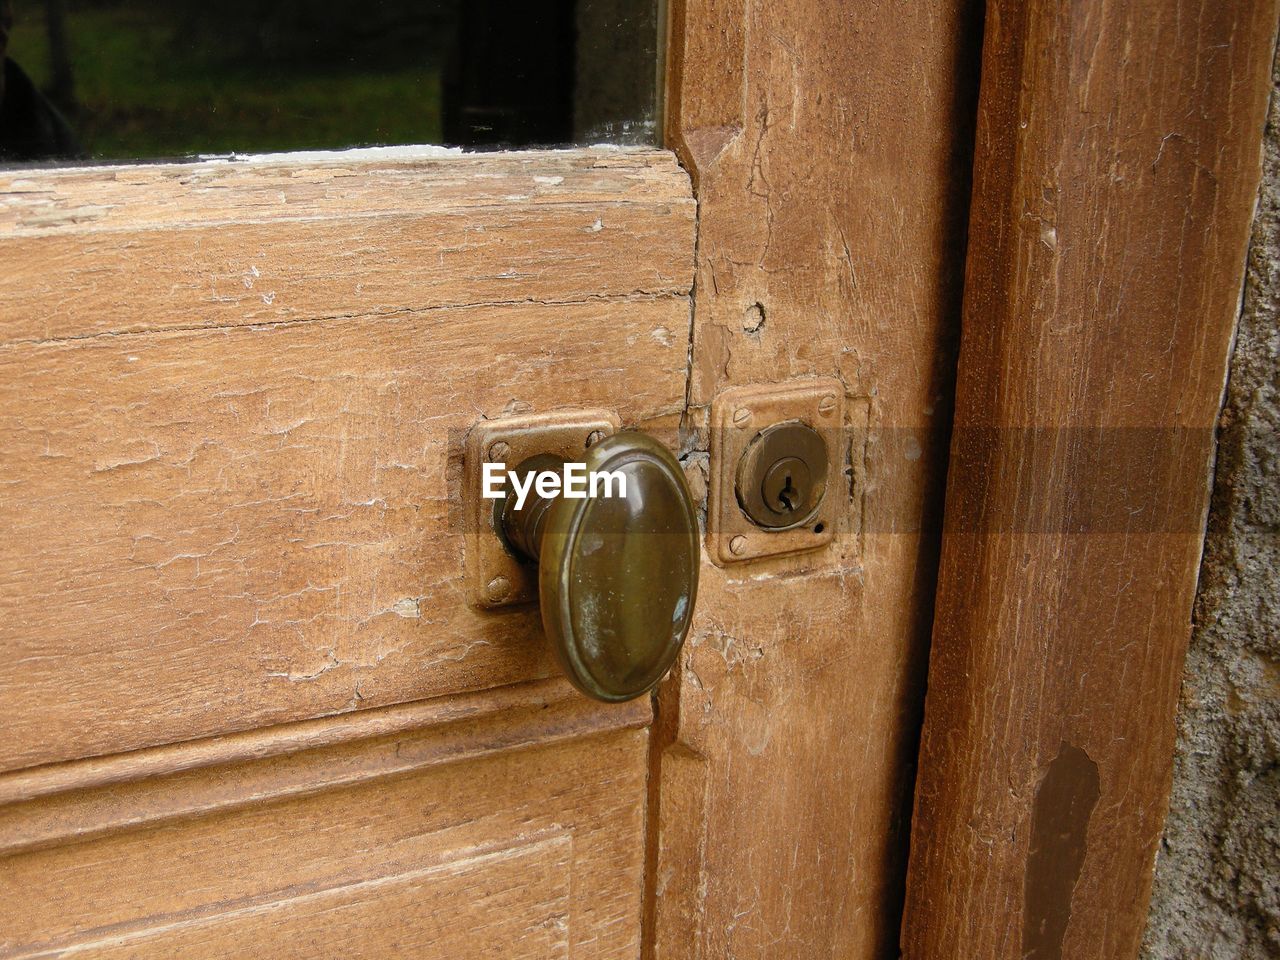 CLOSE-UP OF DOOR HANDLE ON WOODEN TABLE